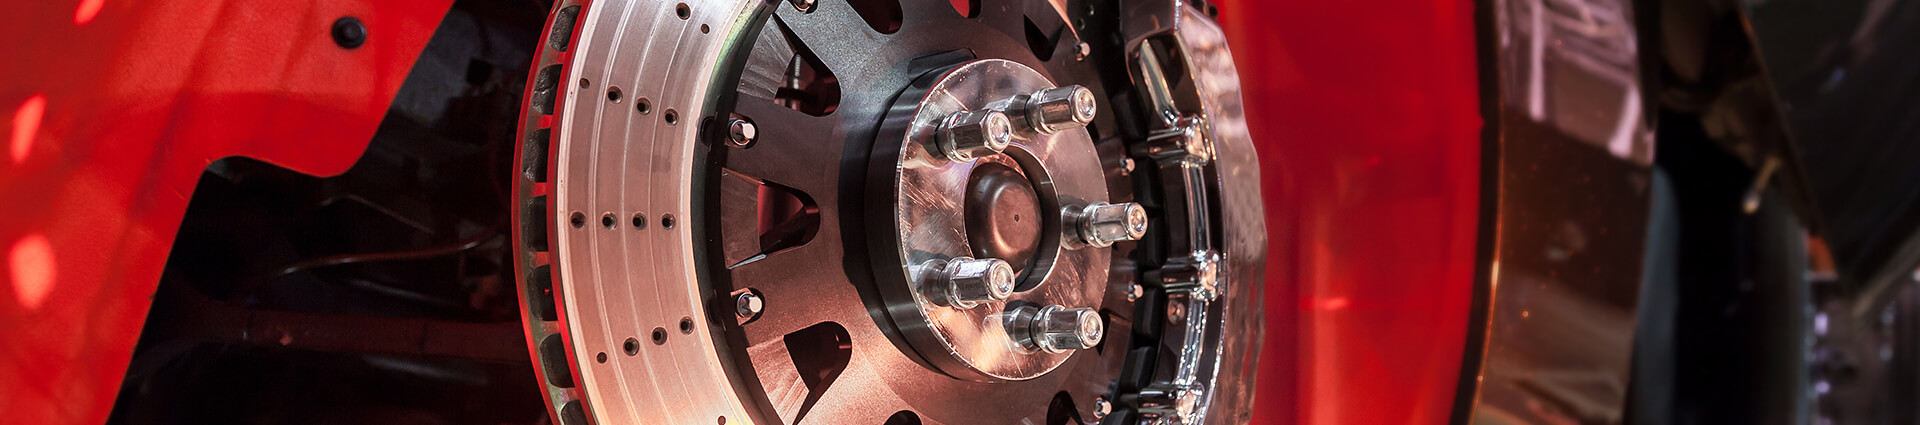 Expert Brake Repair at Ramona Tire & Service Centers in San Clemente, CA Page Banner